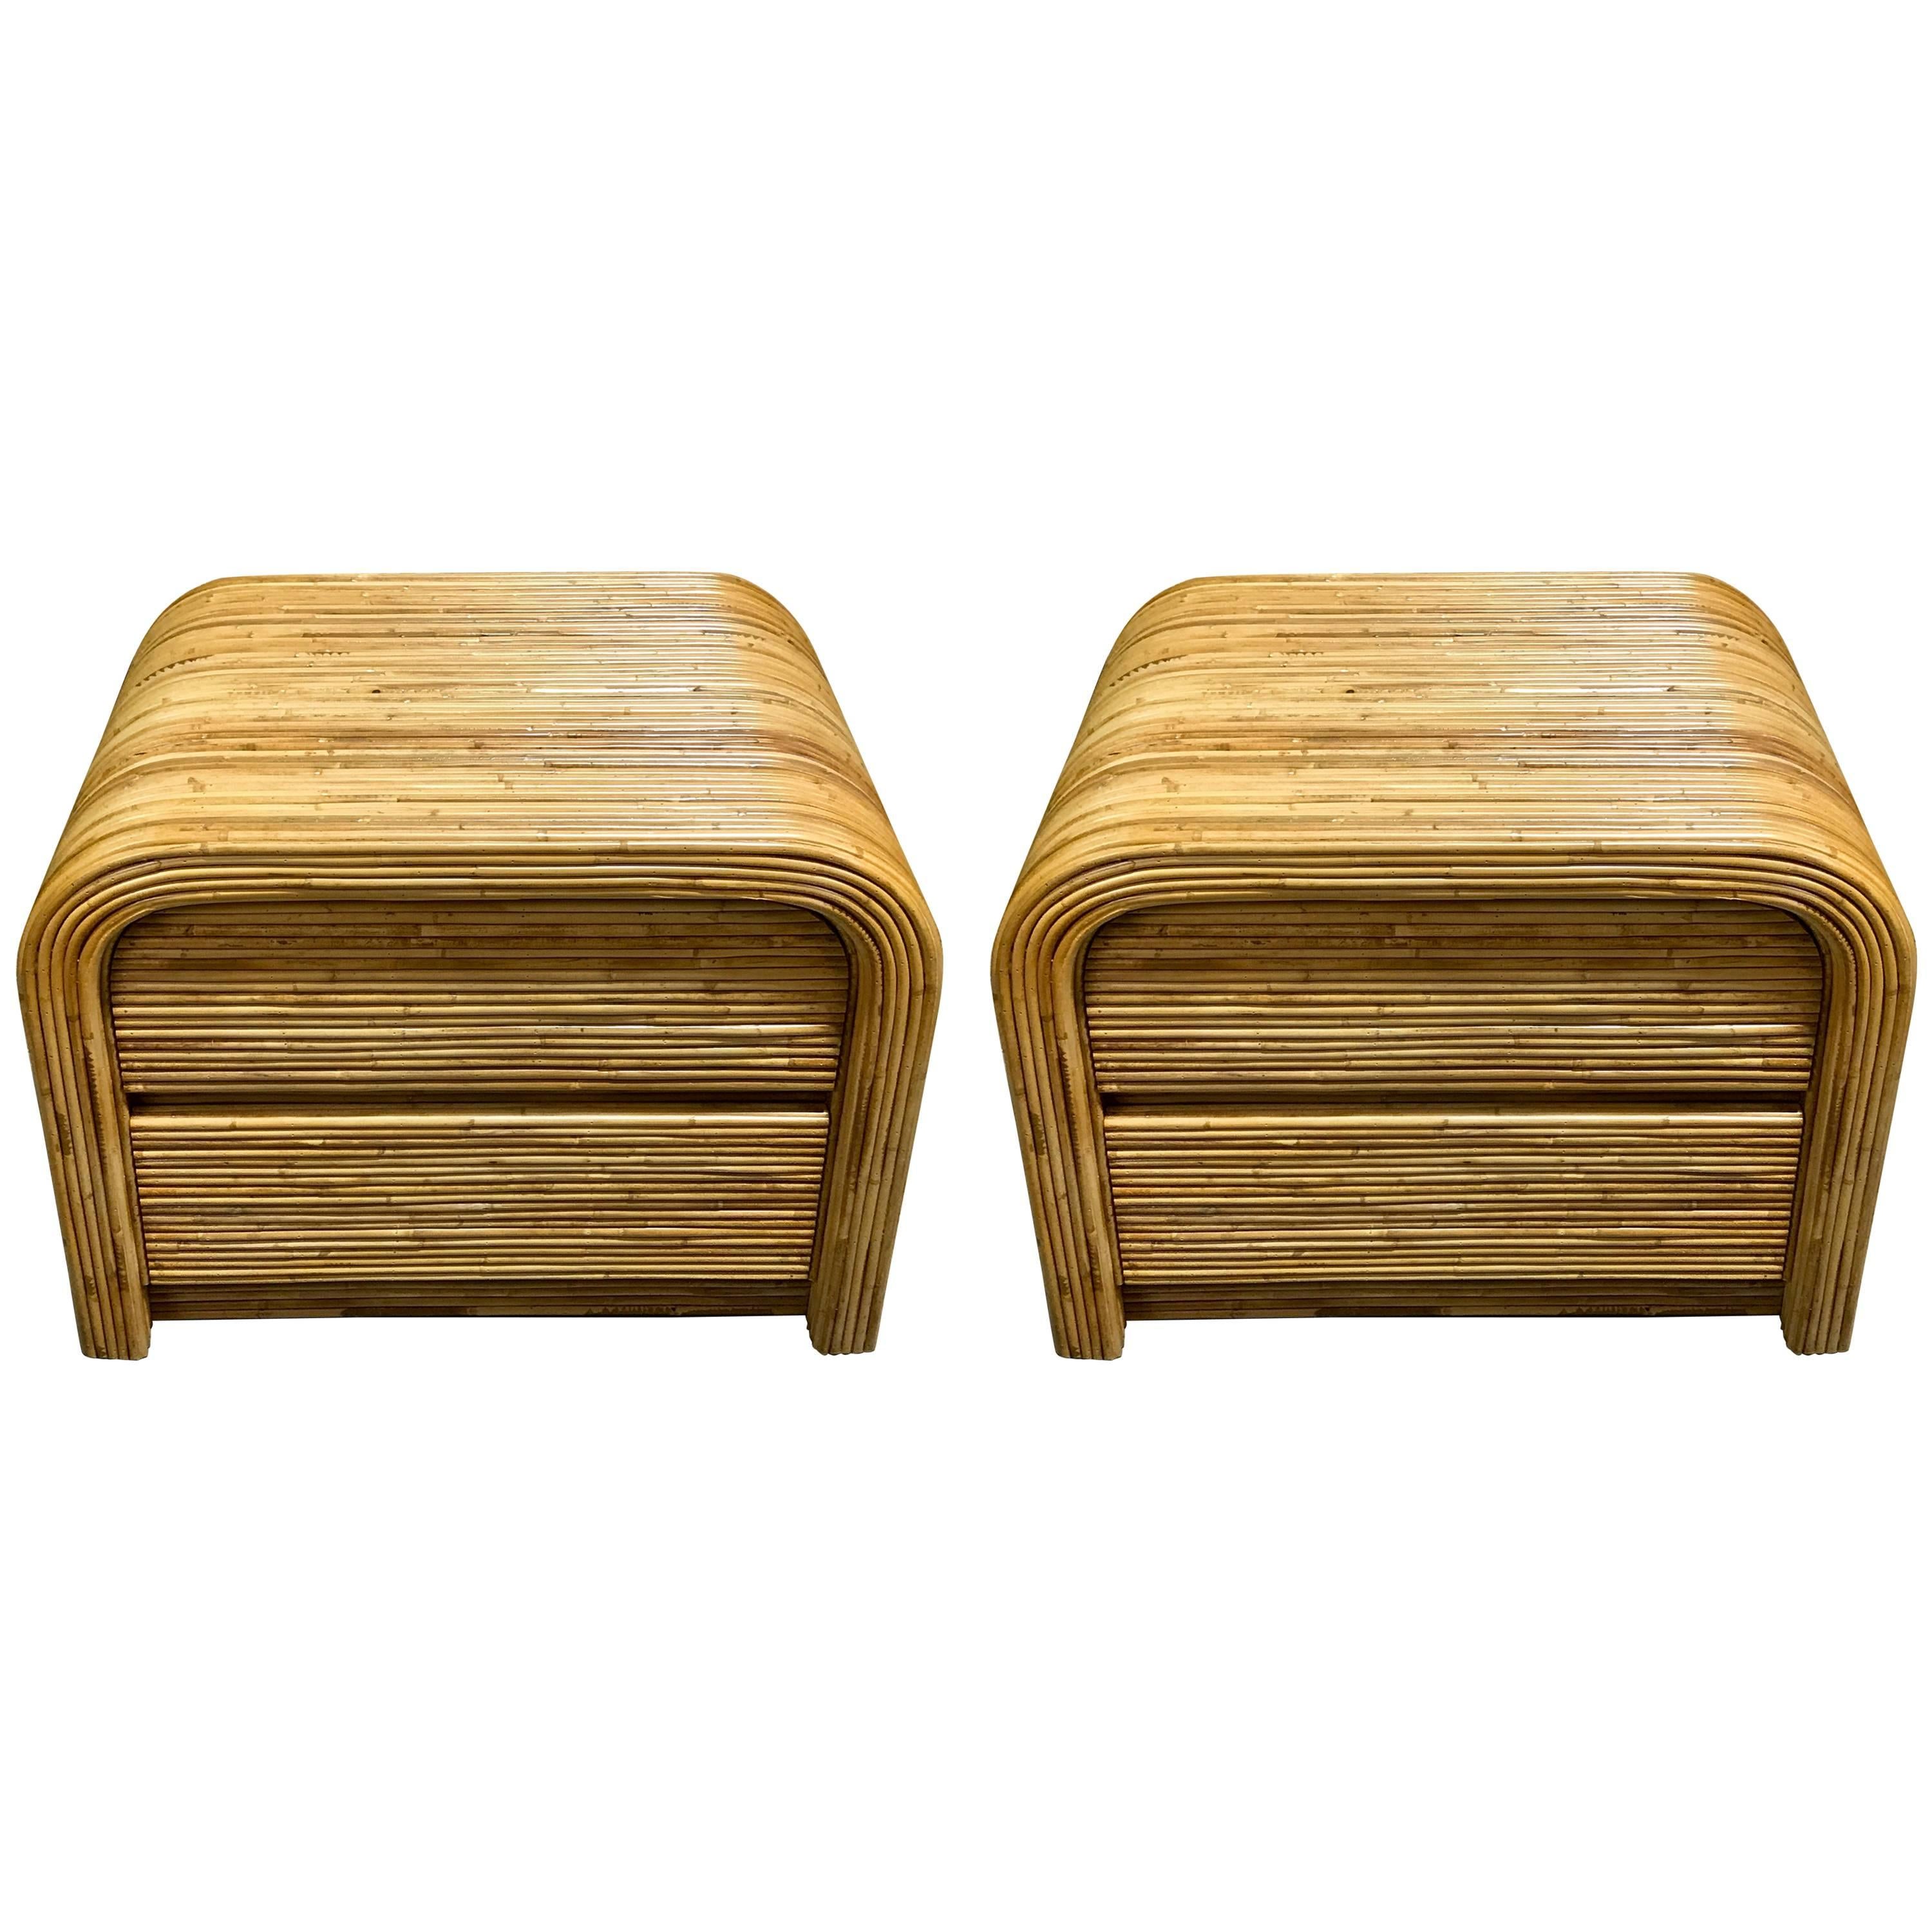 Large Pair of Bamboo End Tables in the Manner of Gabriella Crespi